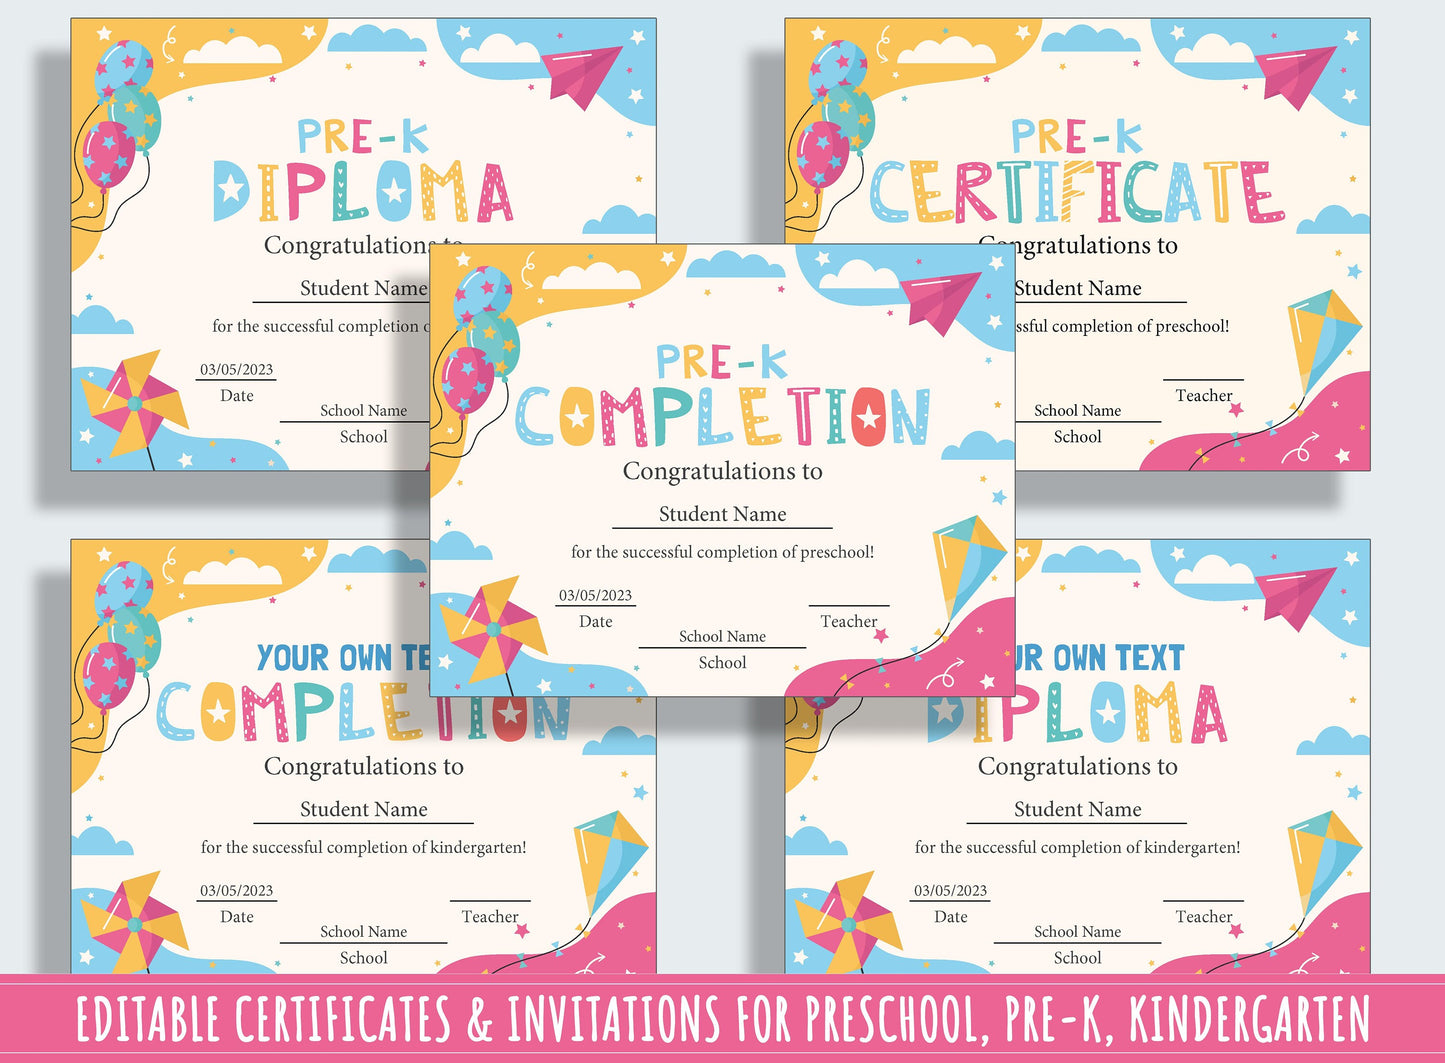 Preschool and Kindergarten End of Year Celebration Kit: 37 Editable Pages for Certificates, Diplomas, and Invitations, Instant Download